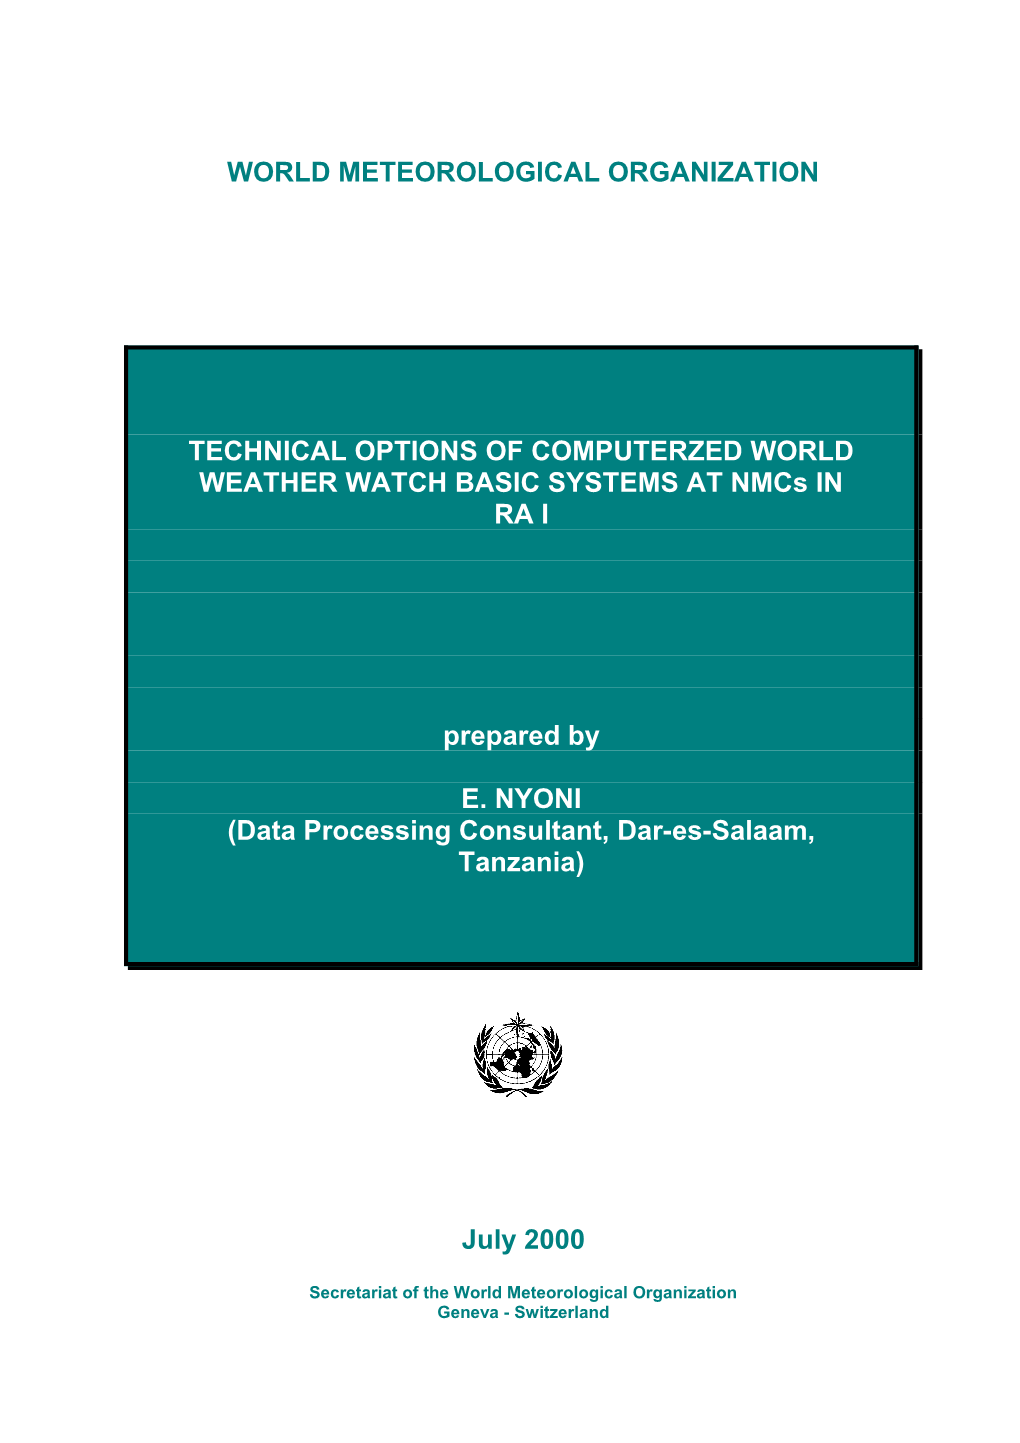 The Organization and Implementation of the Wmo Global Data Processing System (Gdps) At